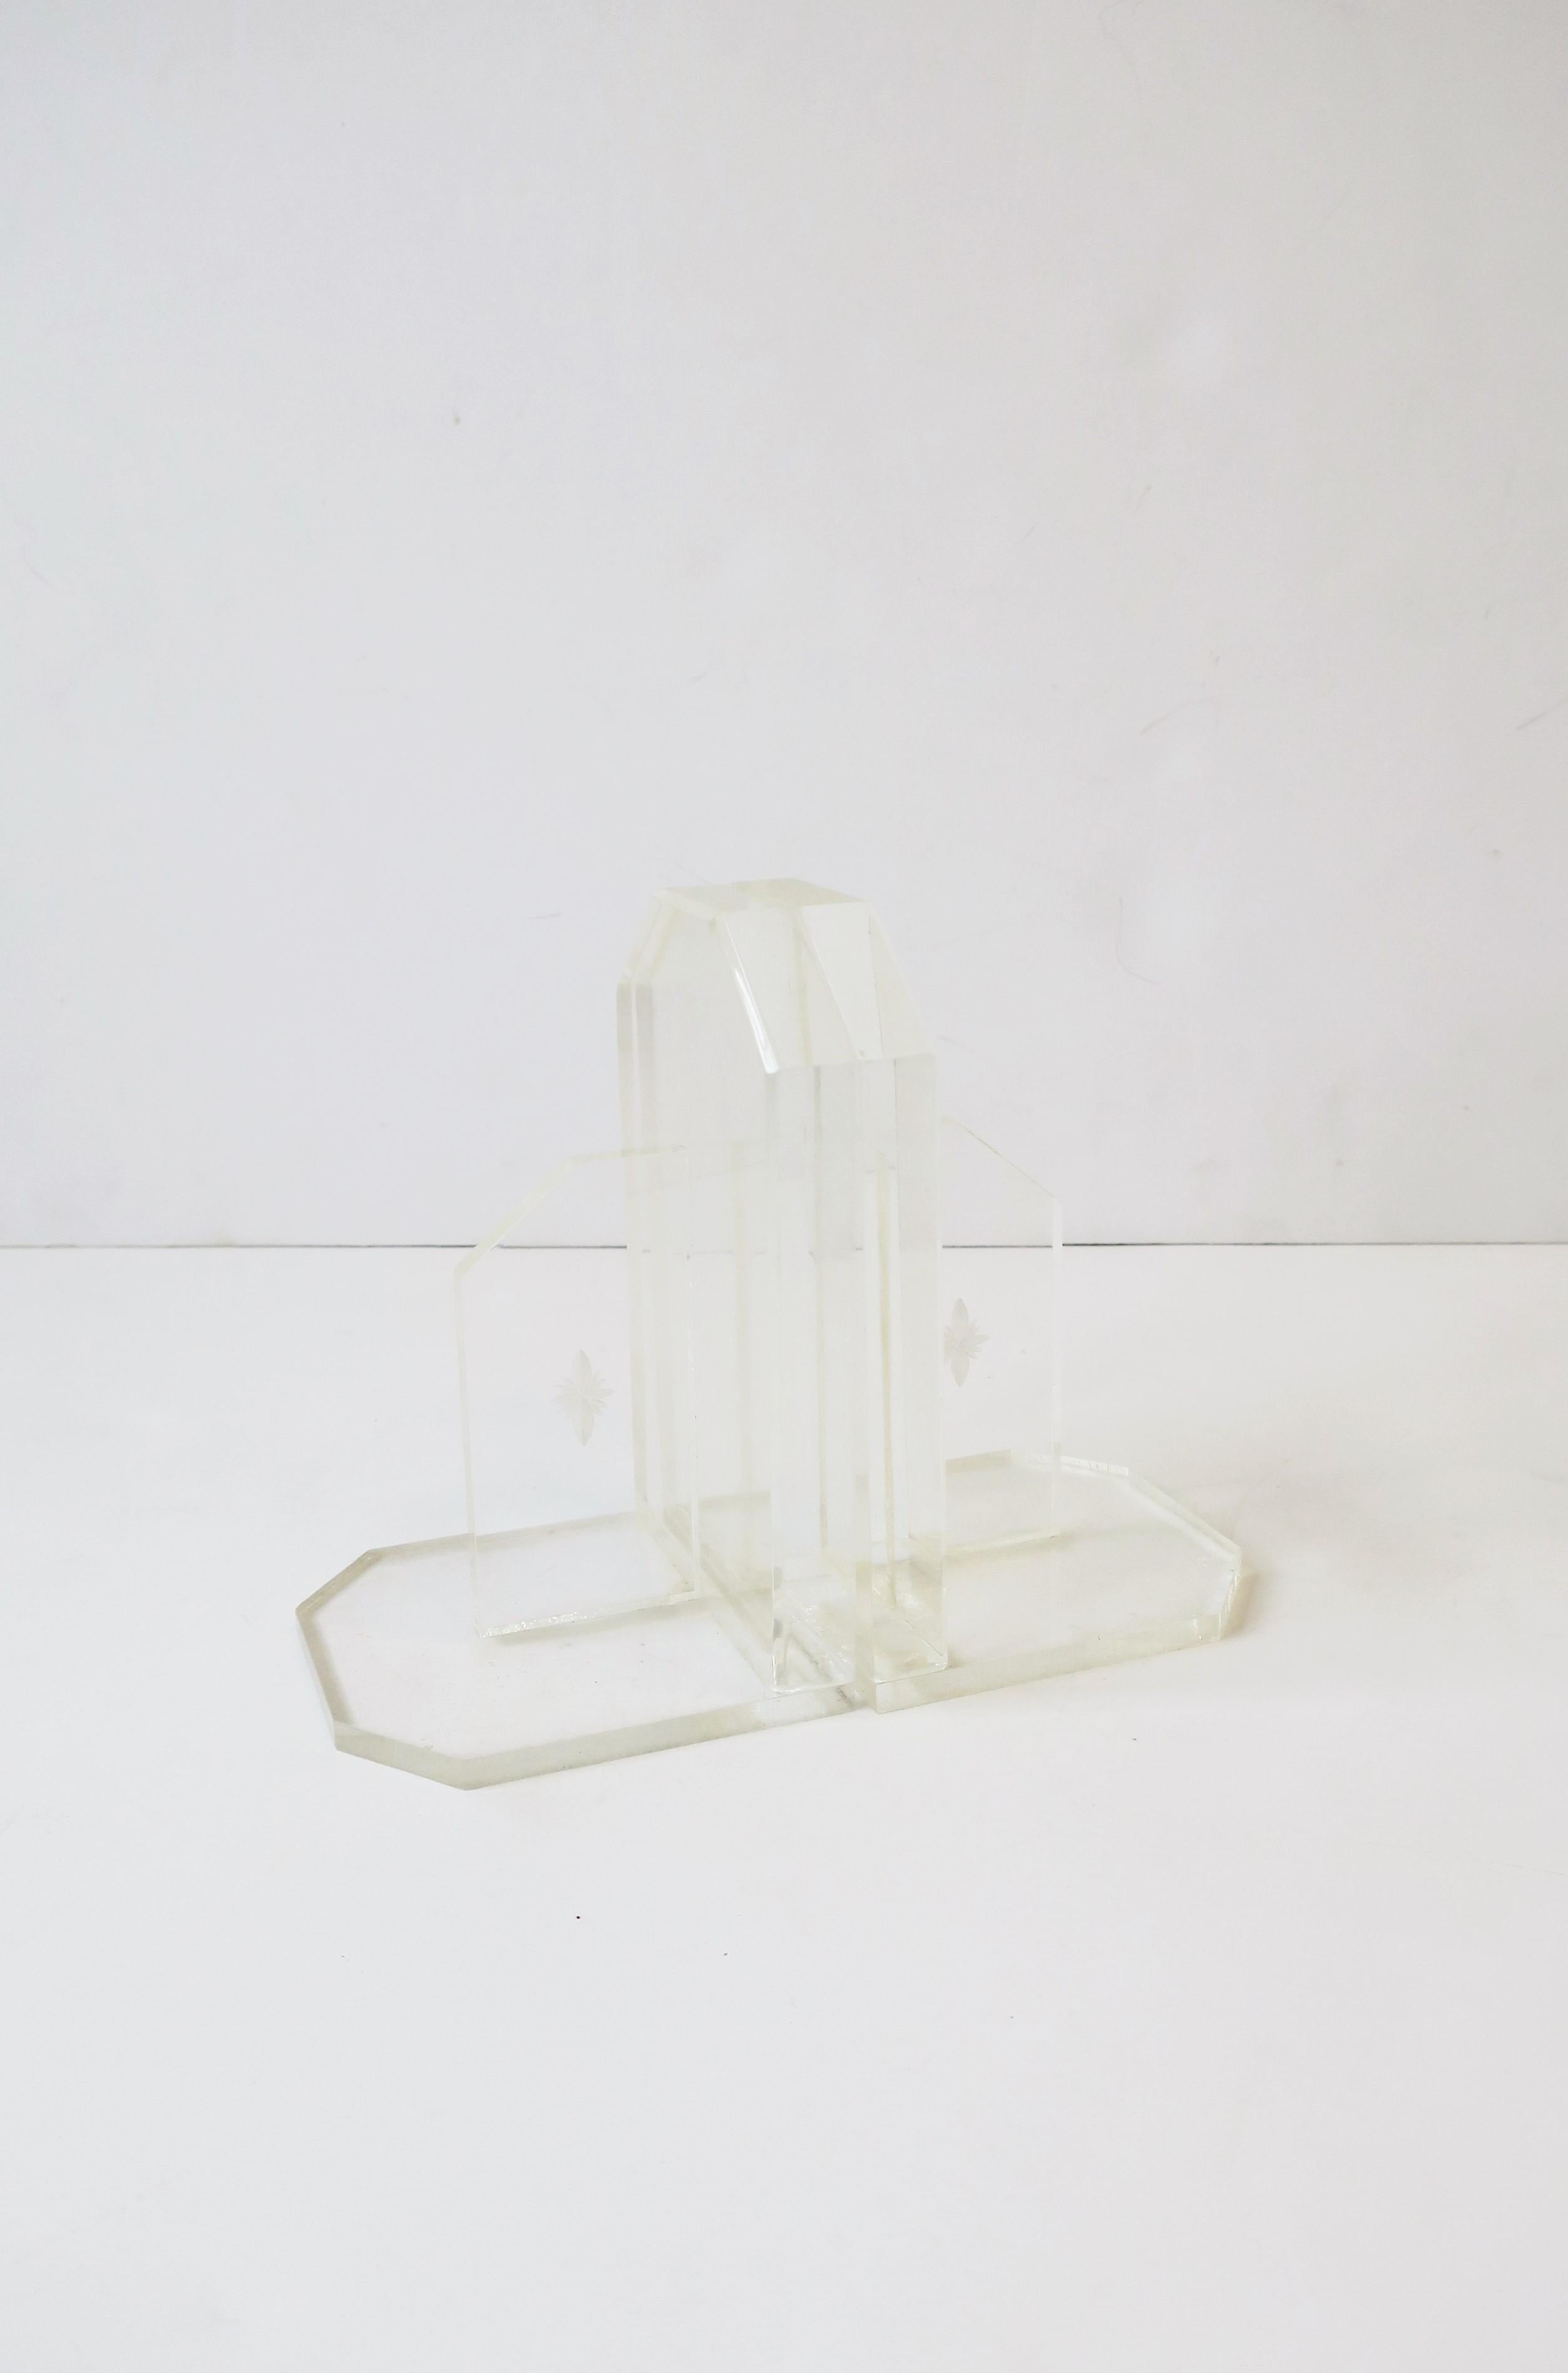 A pair of clear acrylic bookends with Modern edge and jewel-like design, circa mid-20th century, 1960s. Each measure: 6